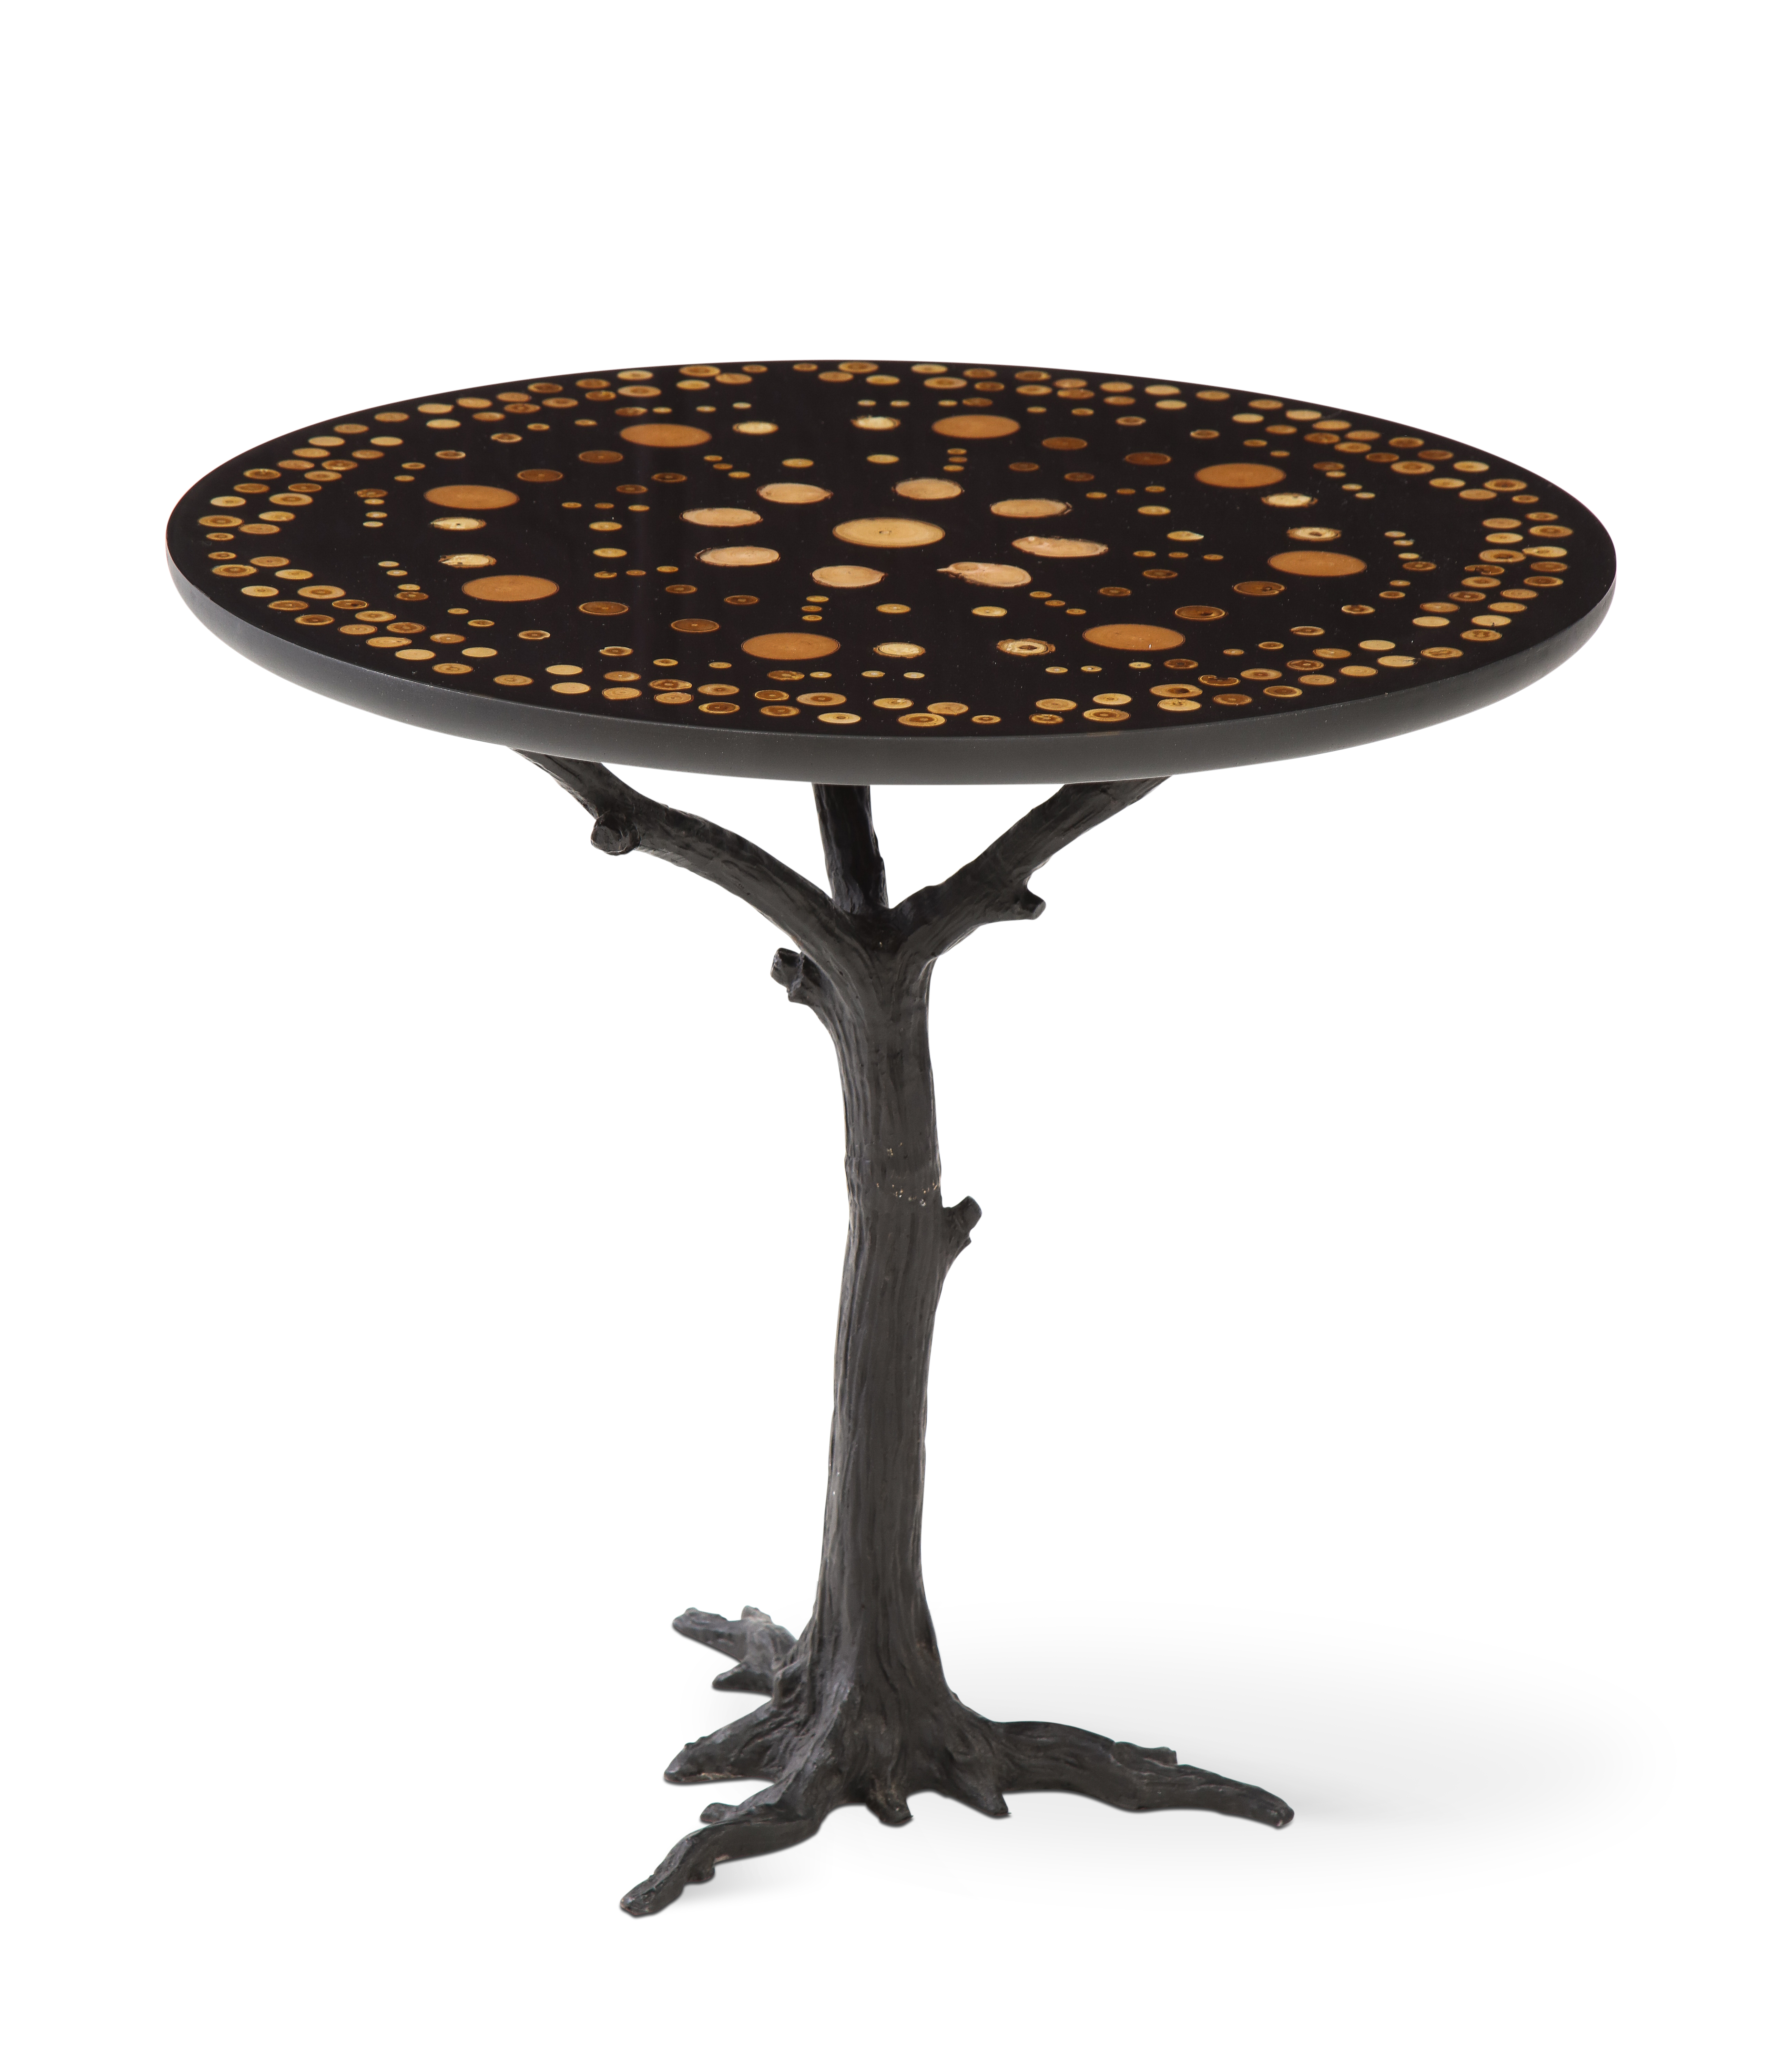 Contemporary table. Iron base with an Unique art piece designed by ABDB Studio.